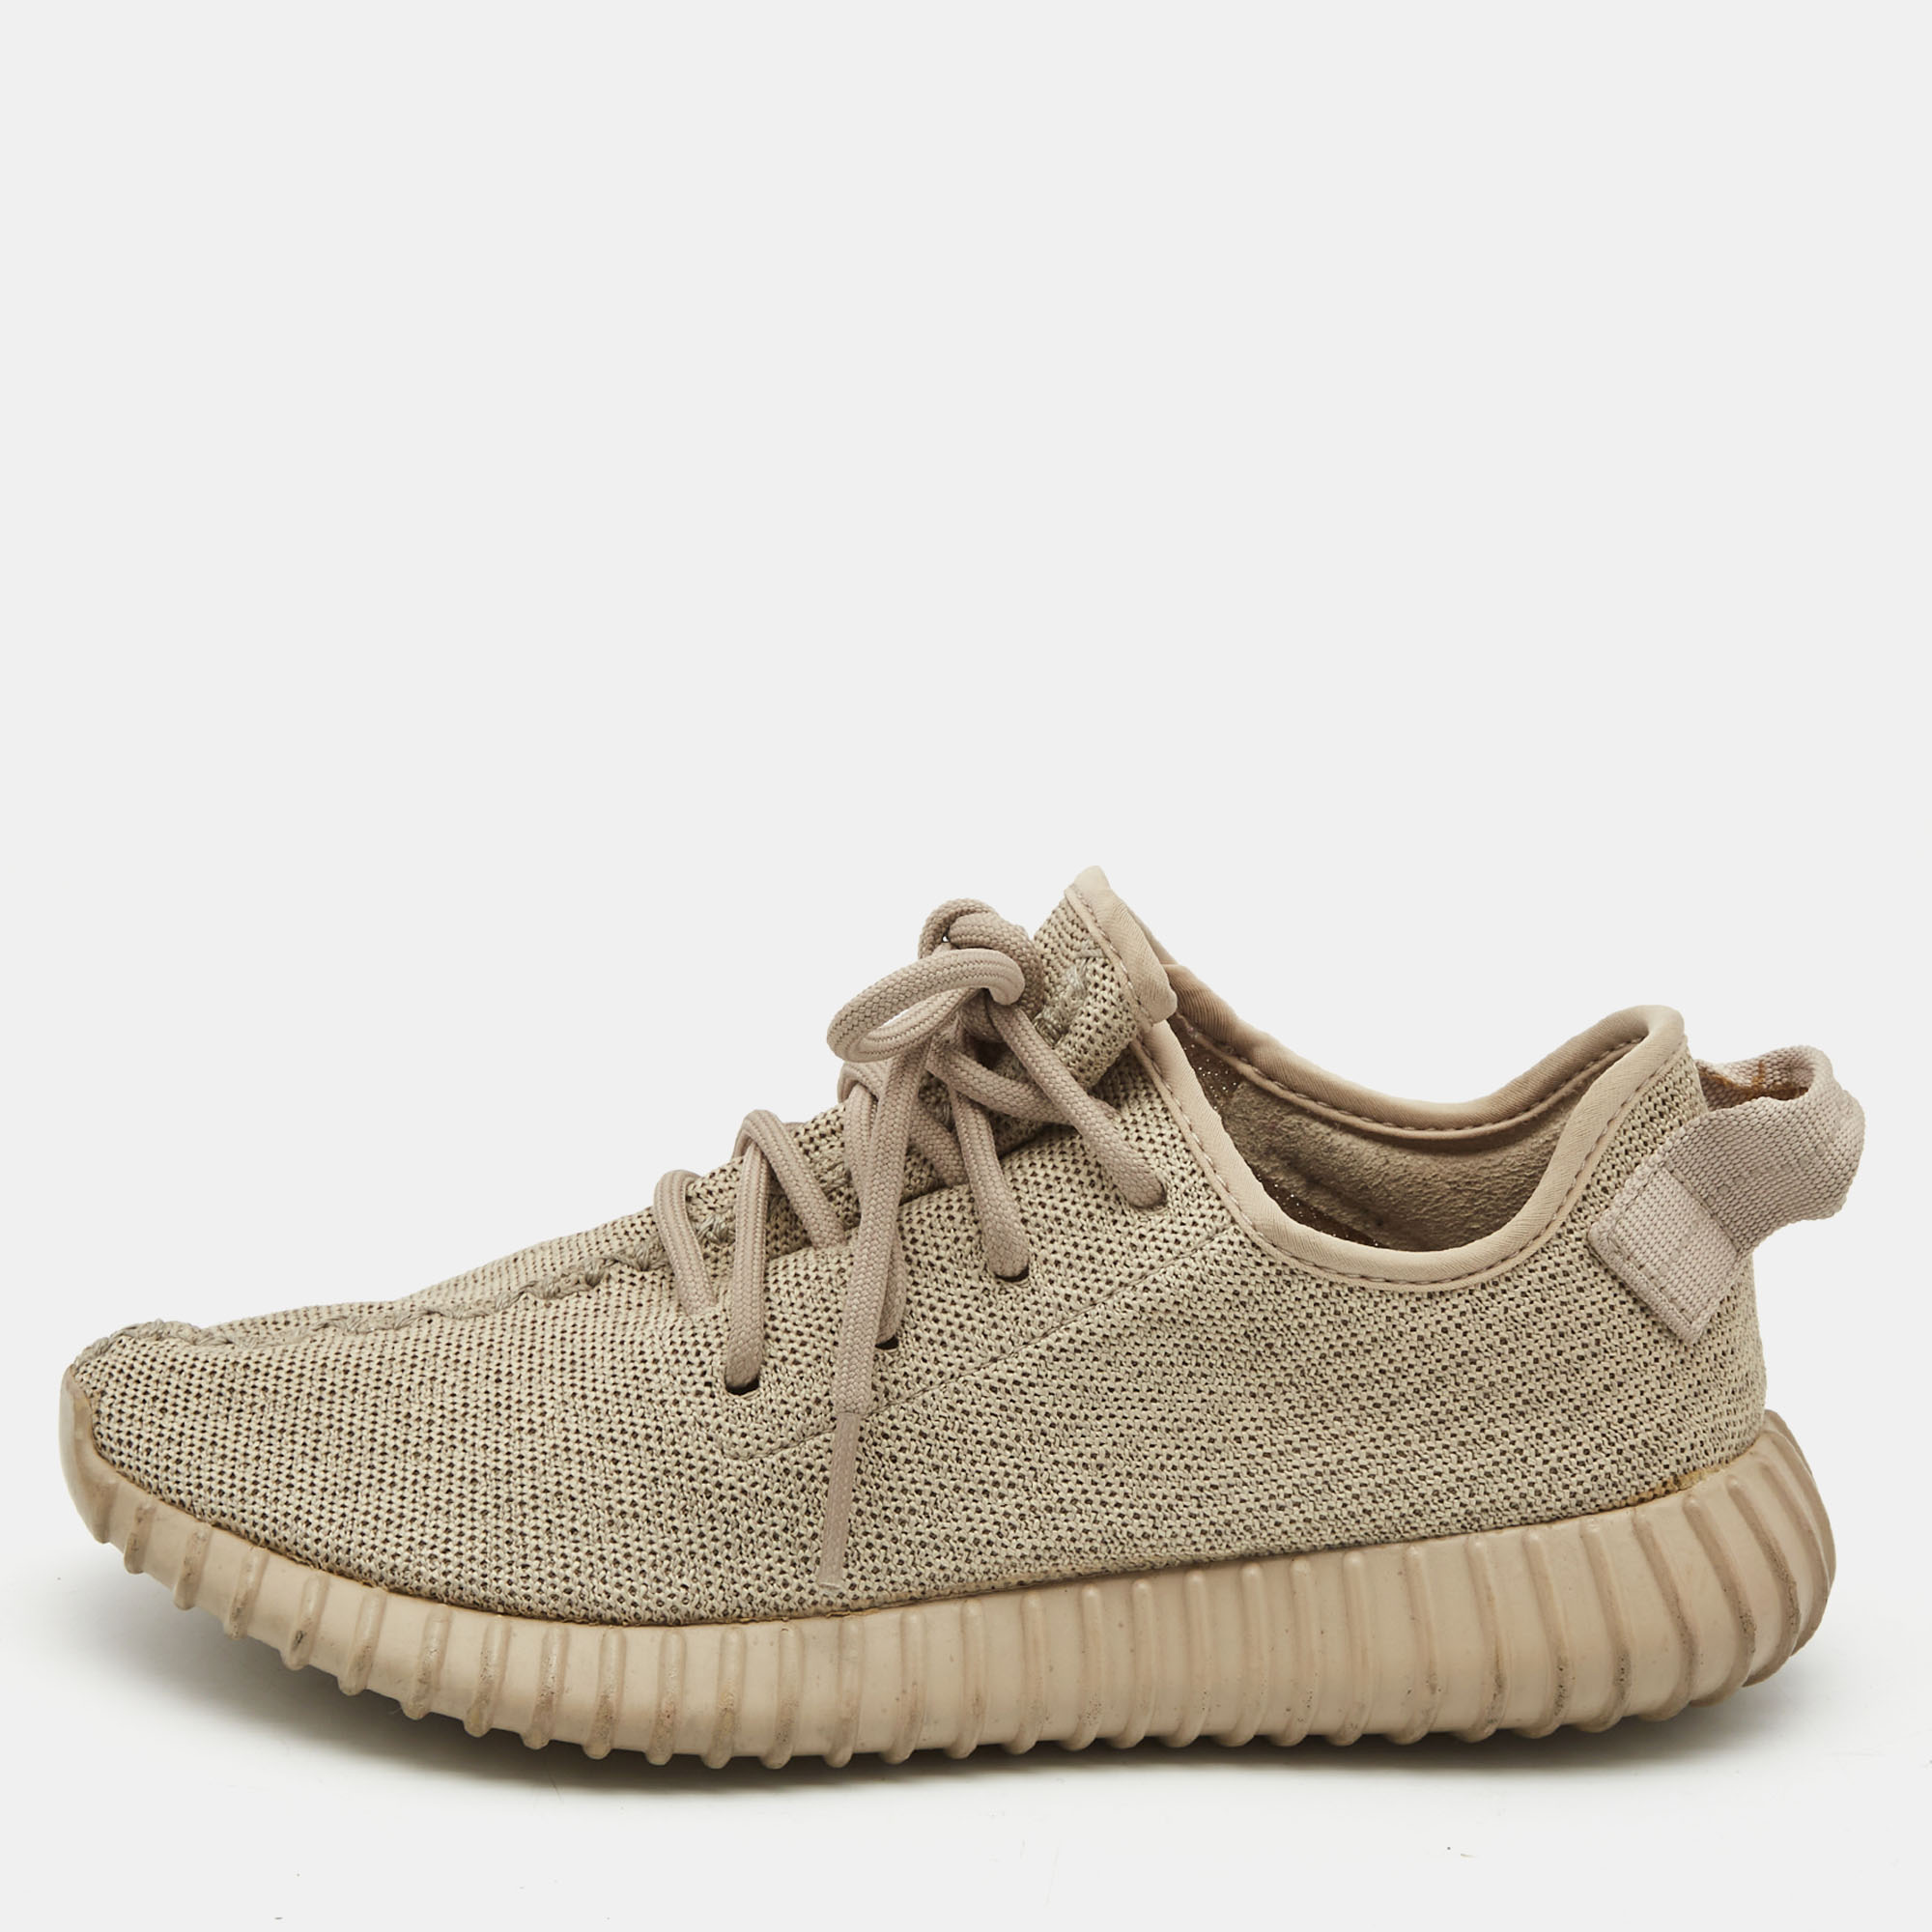 Pre-owned Yeezy X Adidas Beige Knit Fabric Boost 350 V2 Oxford Tan Trainers Size 39 1/3